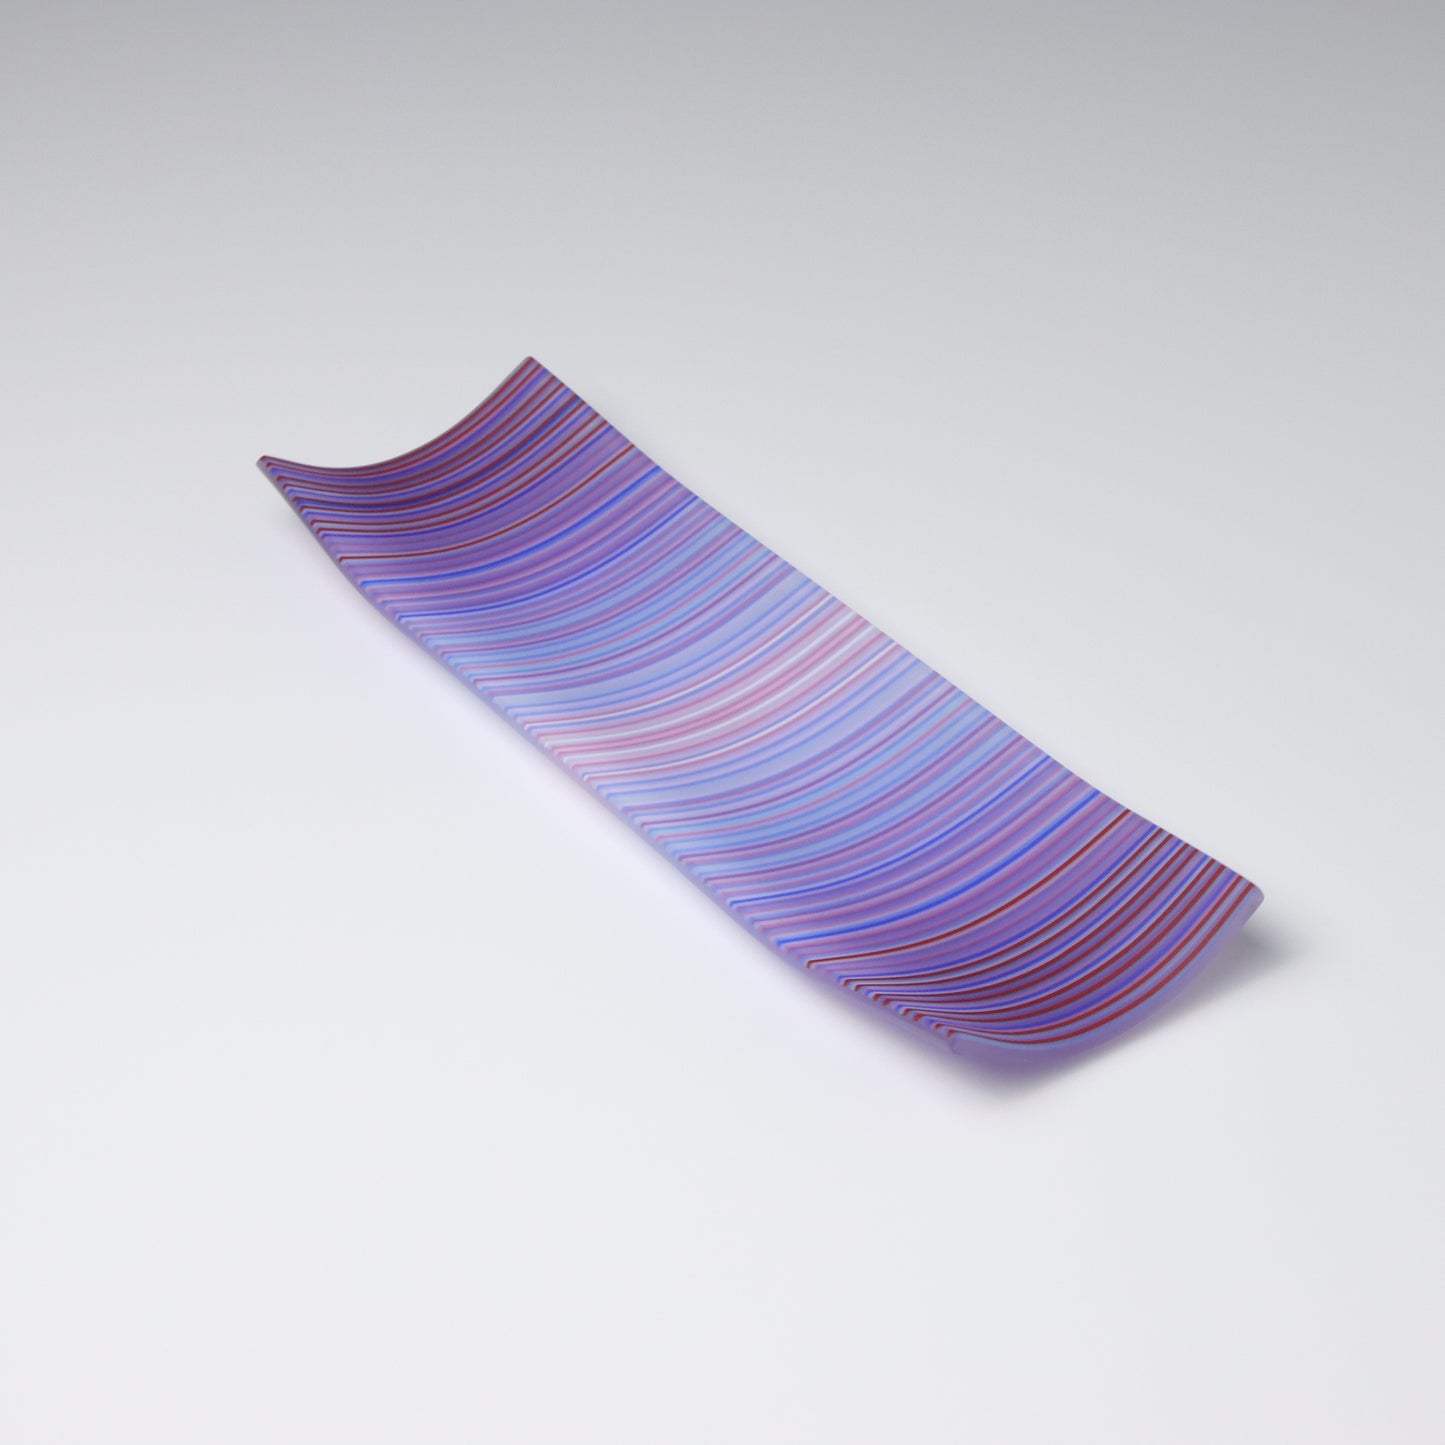 S2307 | Rectangular Shaped ColourWave Glass Plate | Pale and Dark Purples